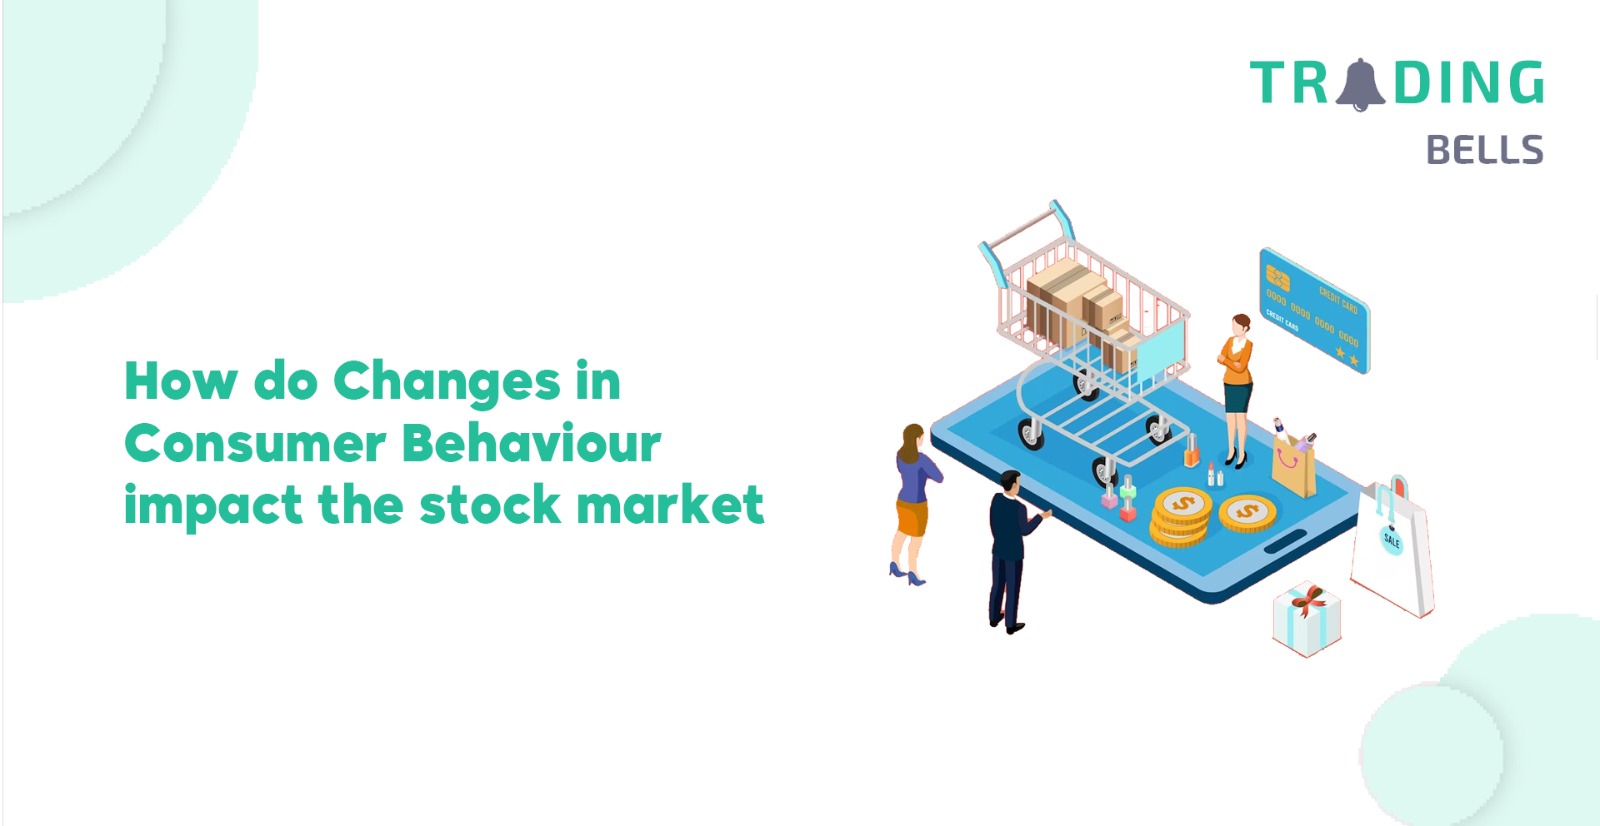 How do Changes in Consumer Behaviour impact the stock market